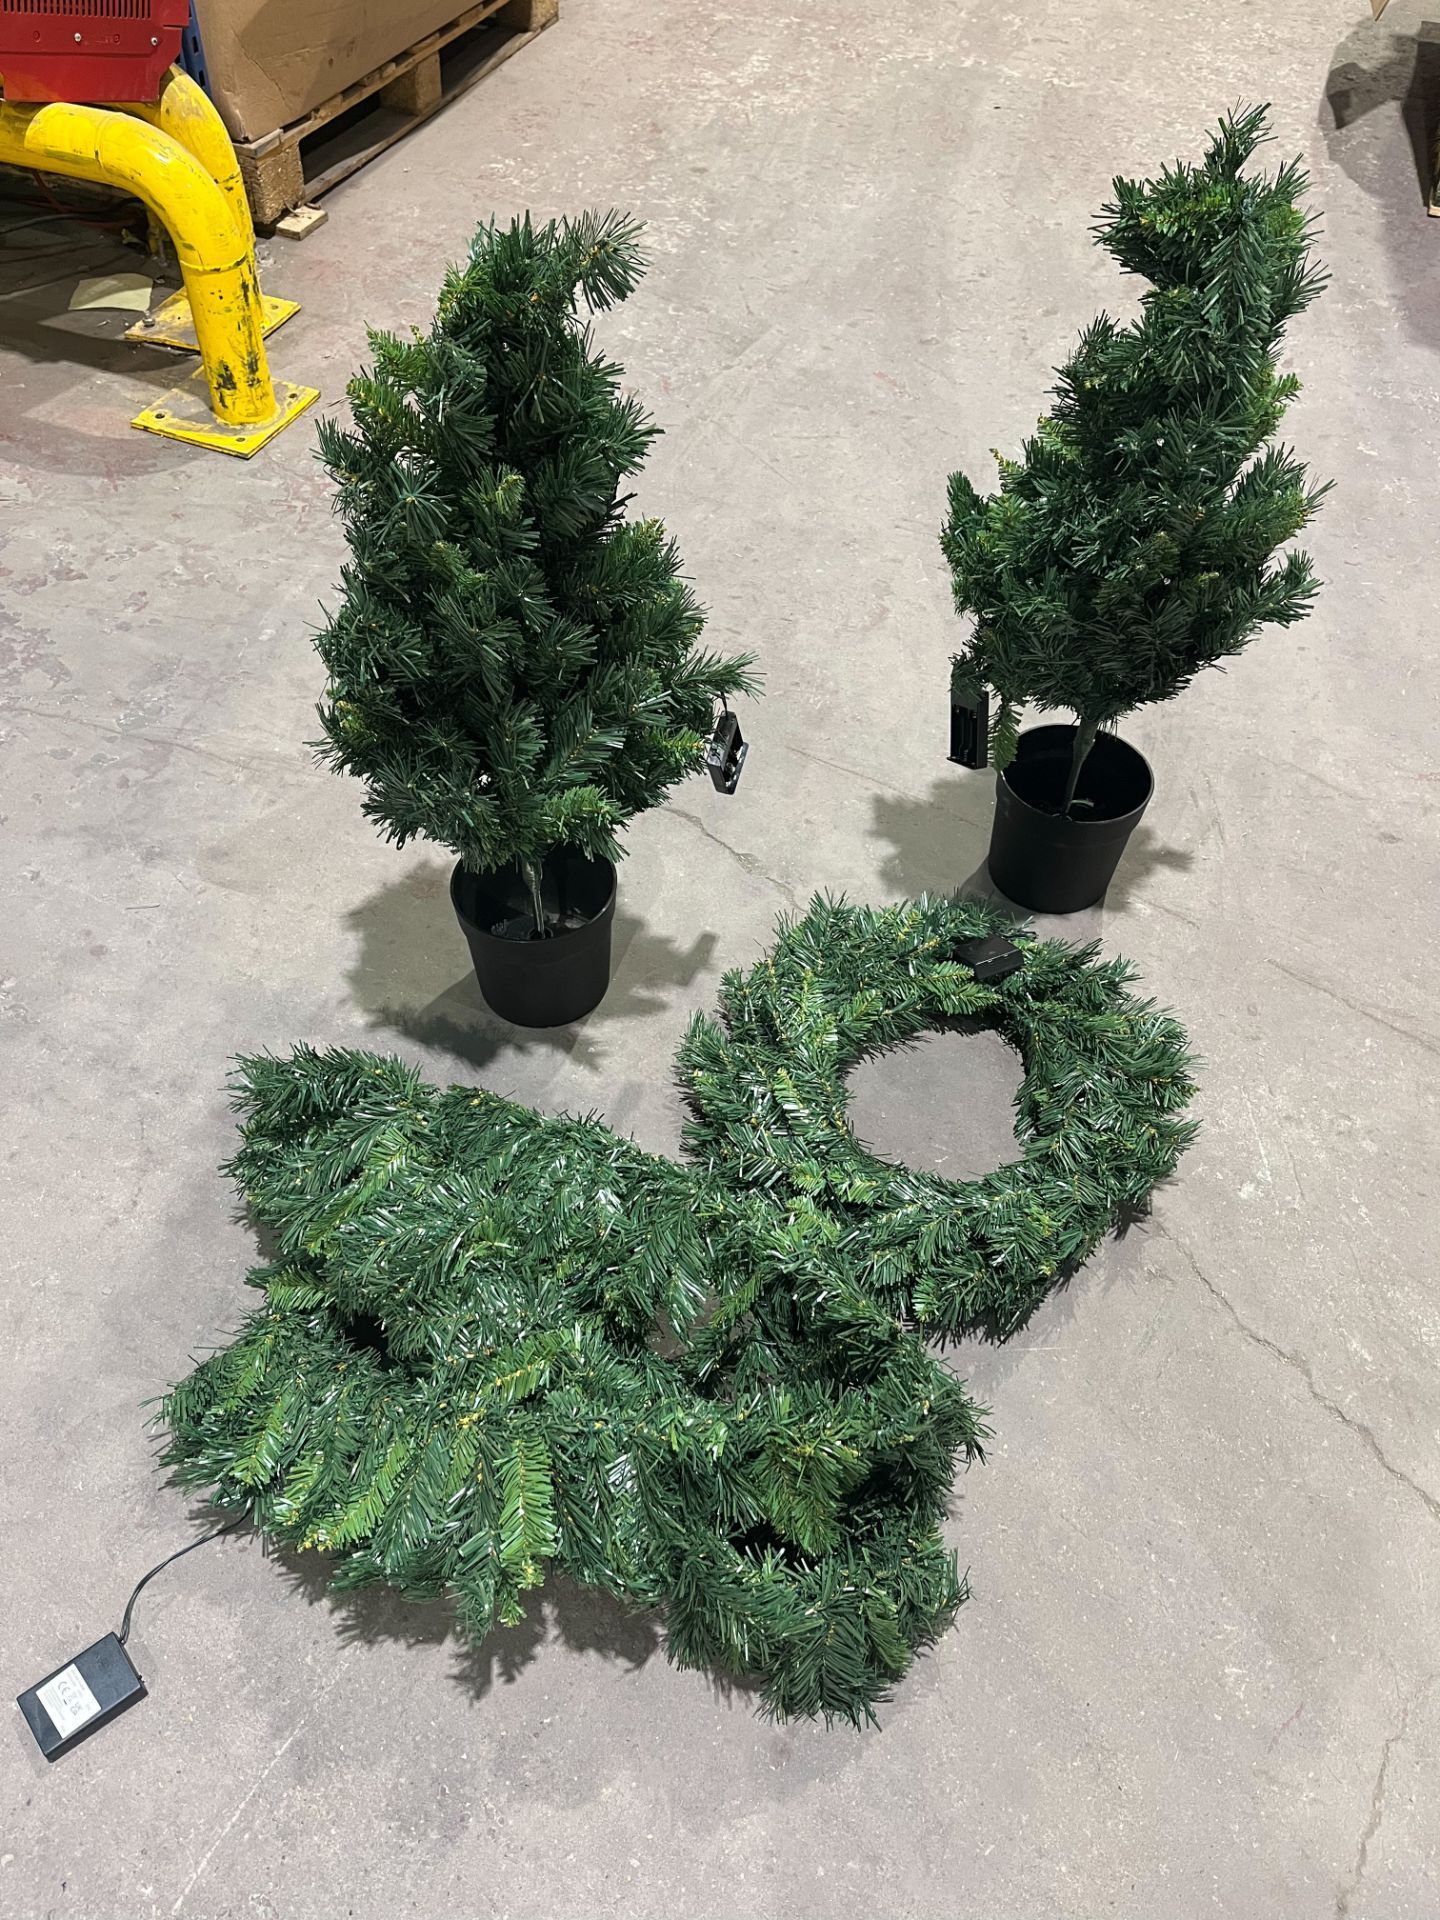 TRADE LOT 5 X BRAND NEW CHRISTMAS DOOR LED LIGHTS SETS INCLDUNG 2 X POTTED TREES AND 2 BRANCH CONNE